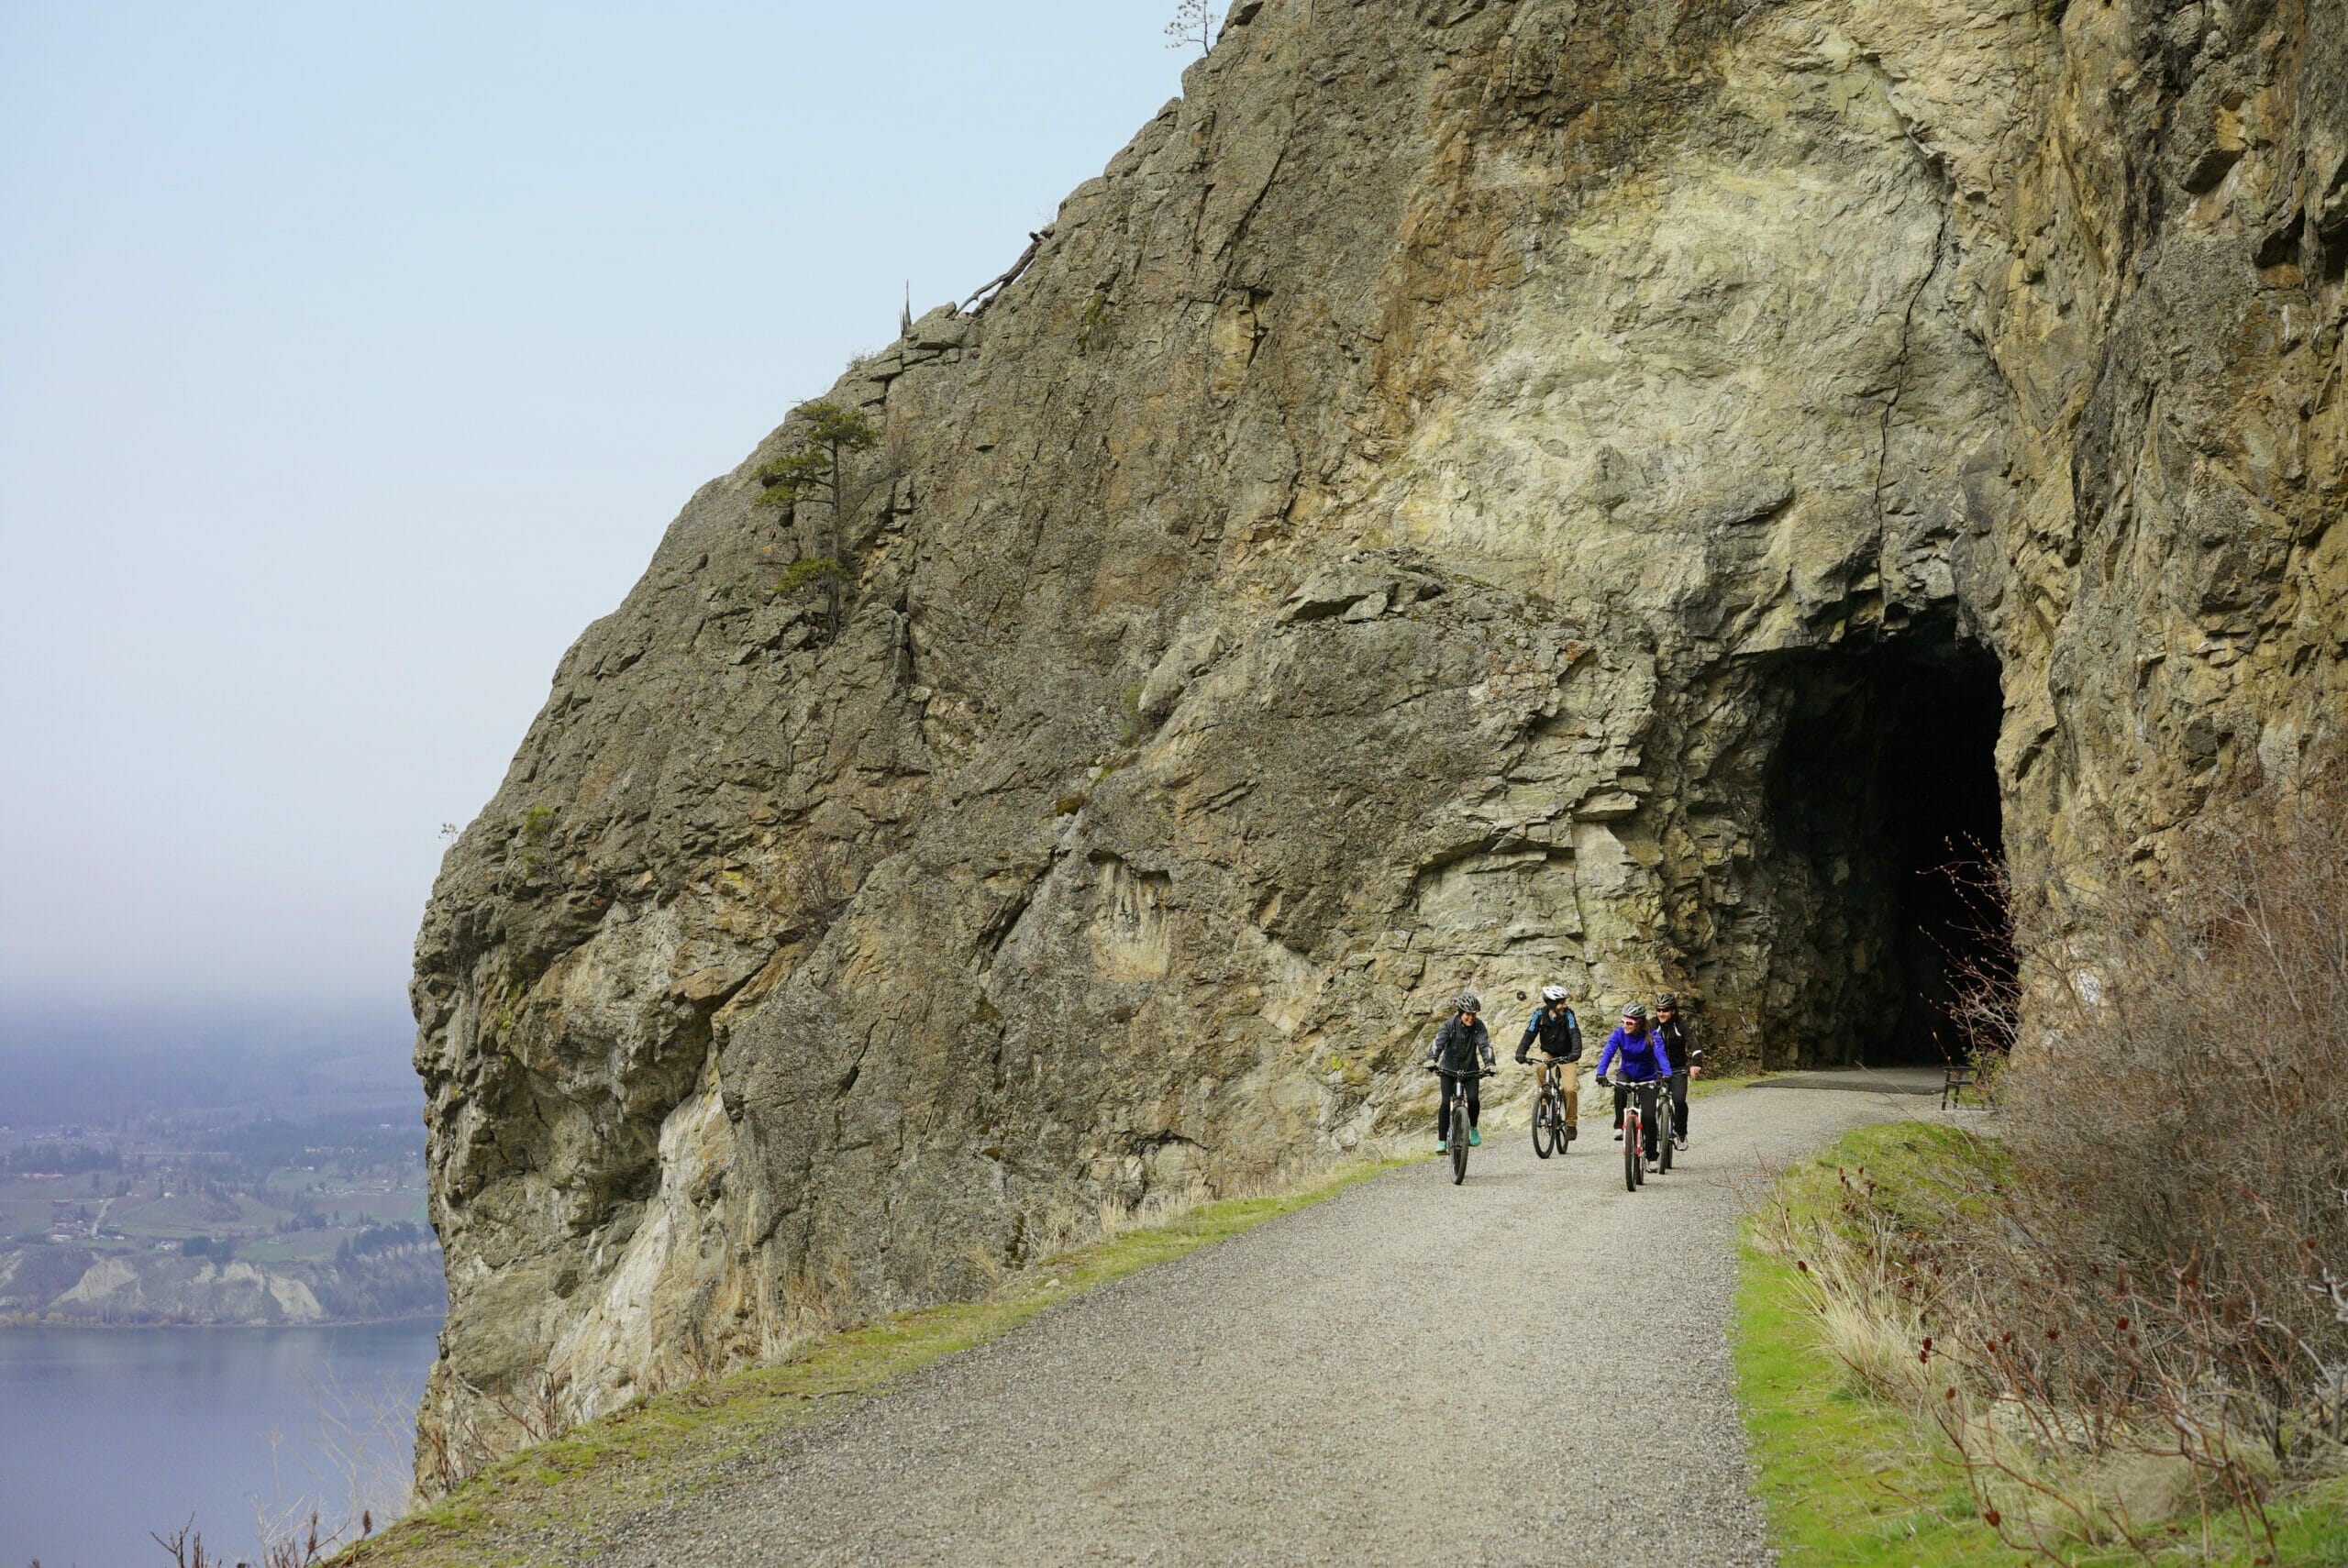 Cyclists emerging from LIttle Tunnel on the Kettle Valley Railway in Penticton, BC